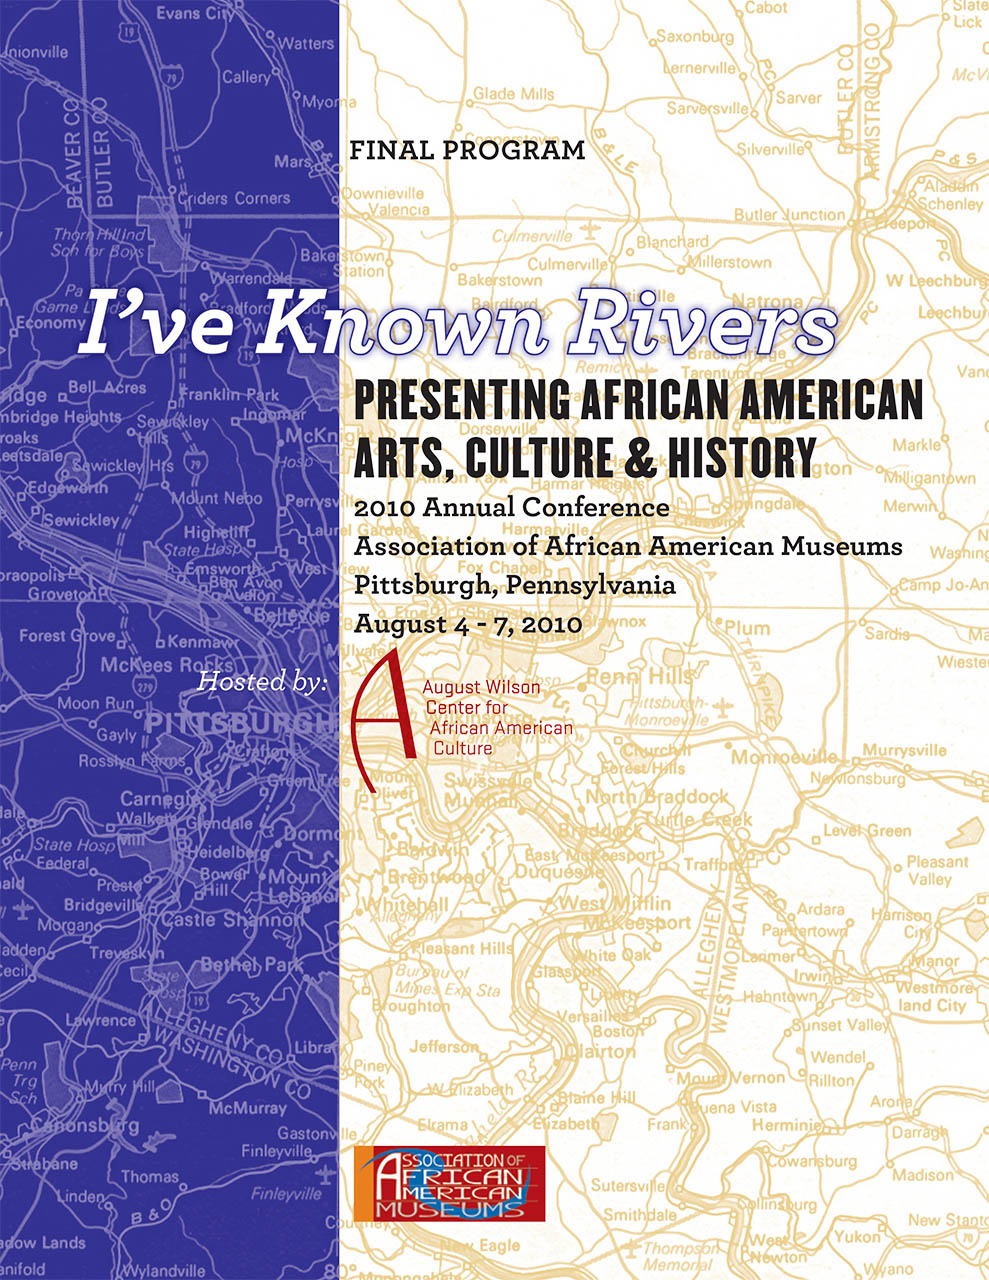 2011 AAAM conference program booklet cover